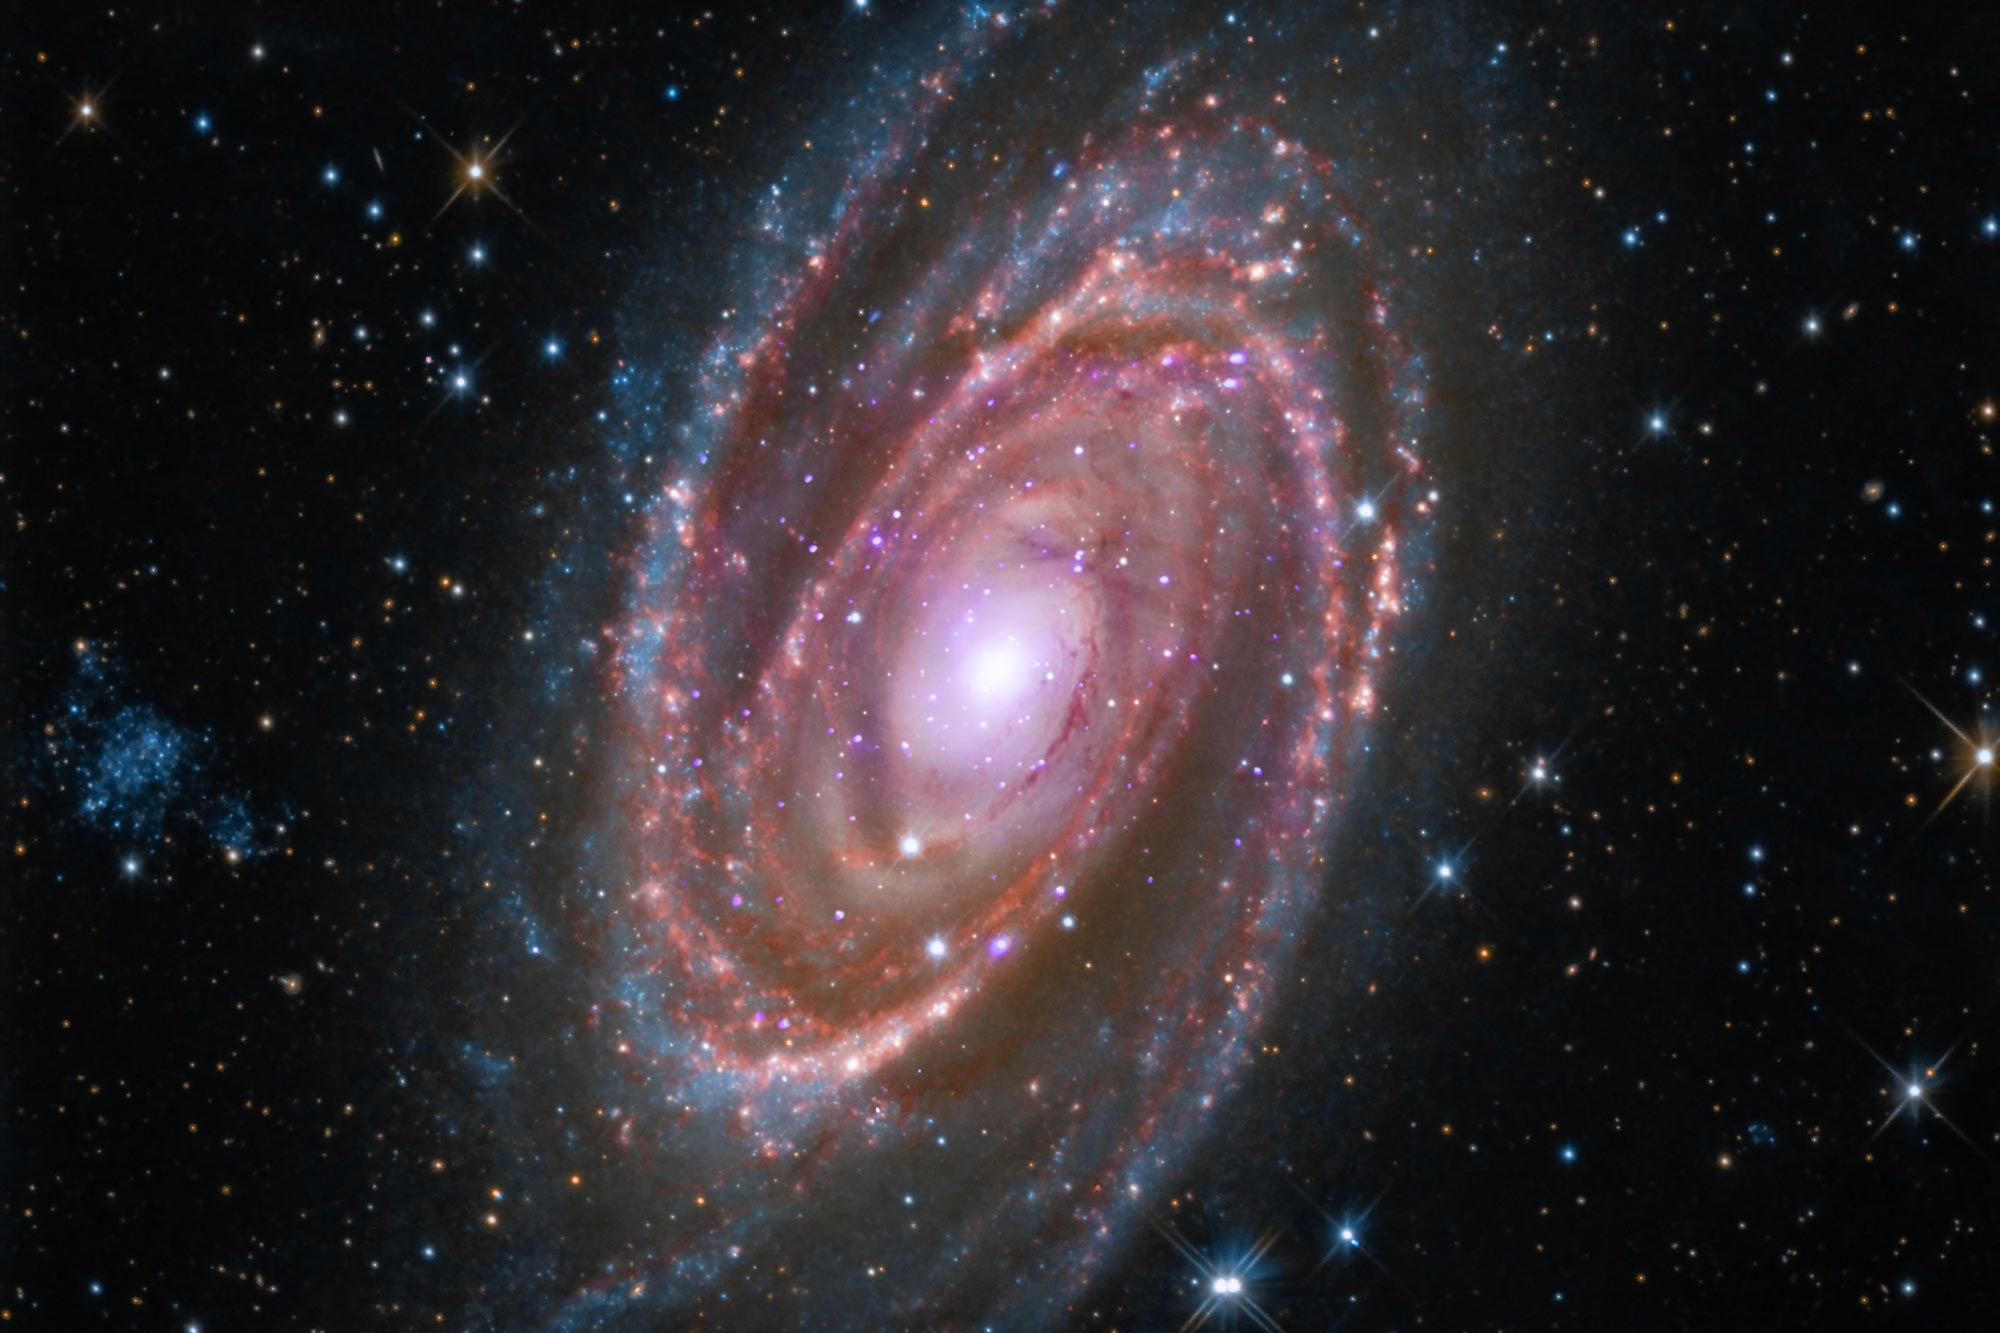 The spiral galaxy M81, spiral galaxy with purple, pink, and blue colors